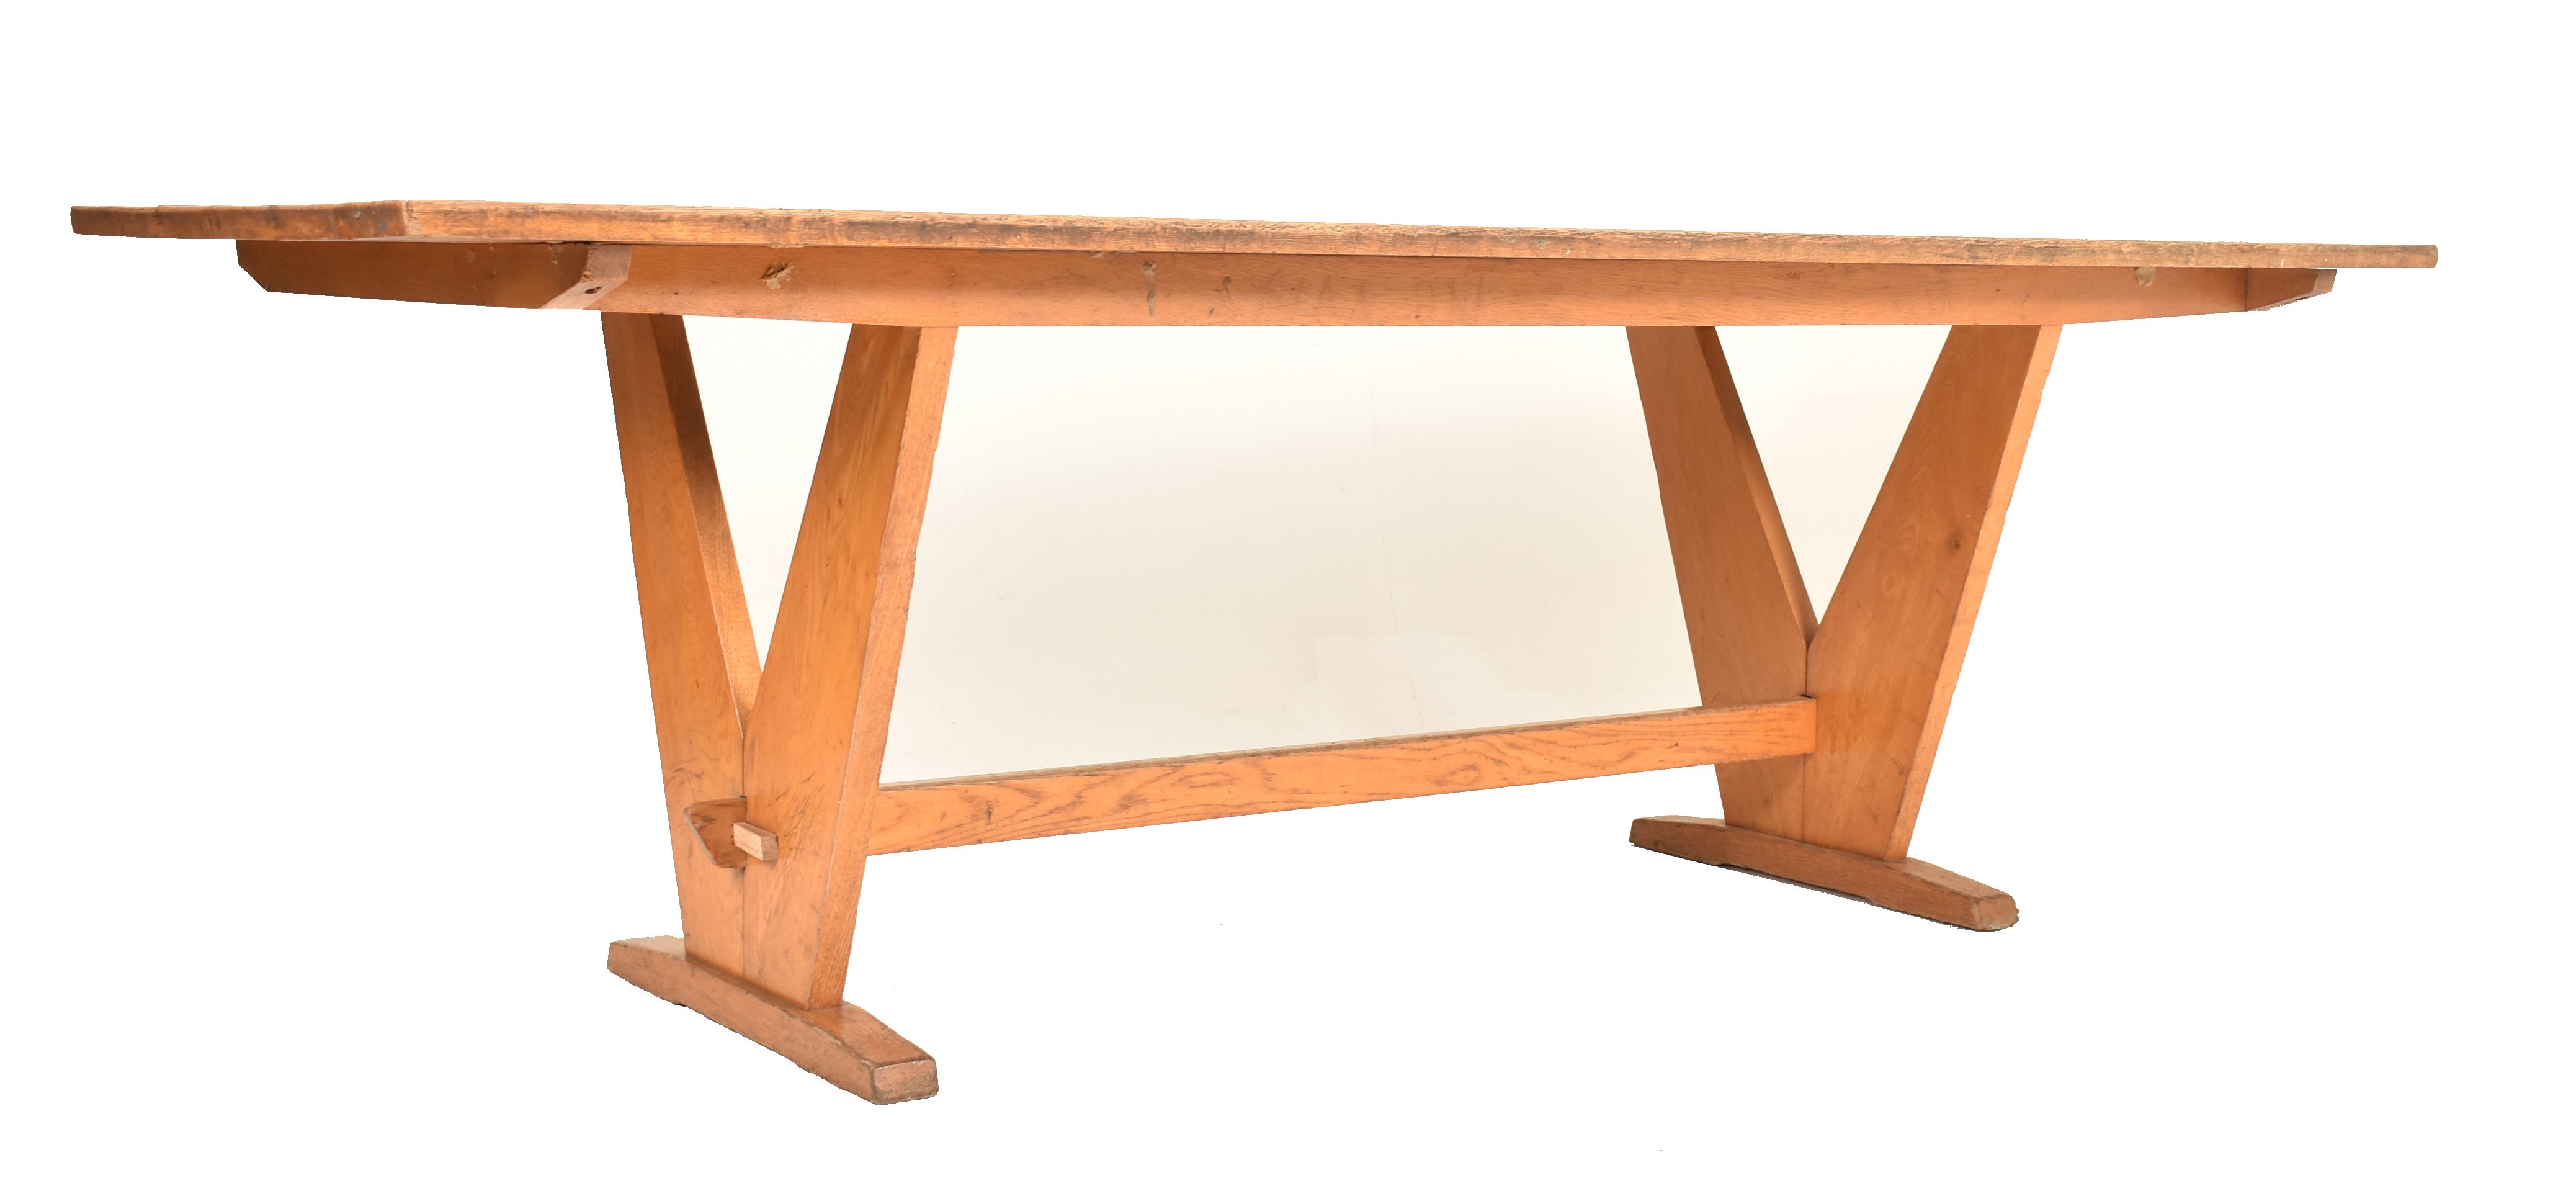 LARGE 20TH CENTURY ELM AND OAK REFECTORY DINING TABLE